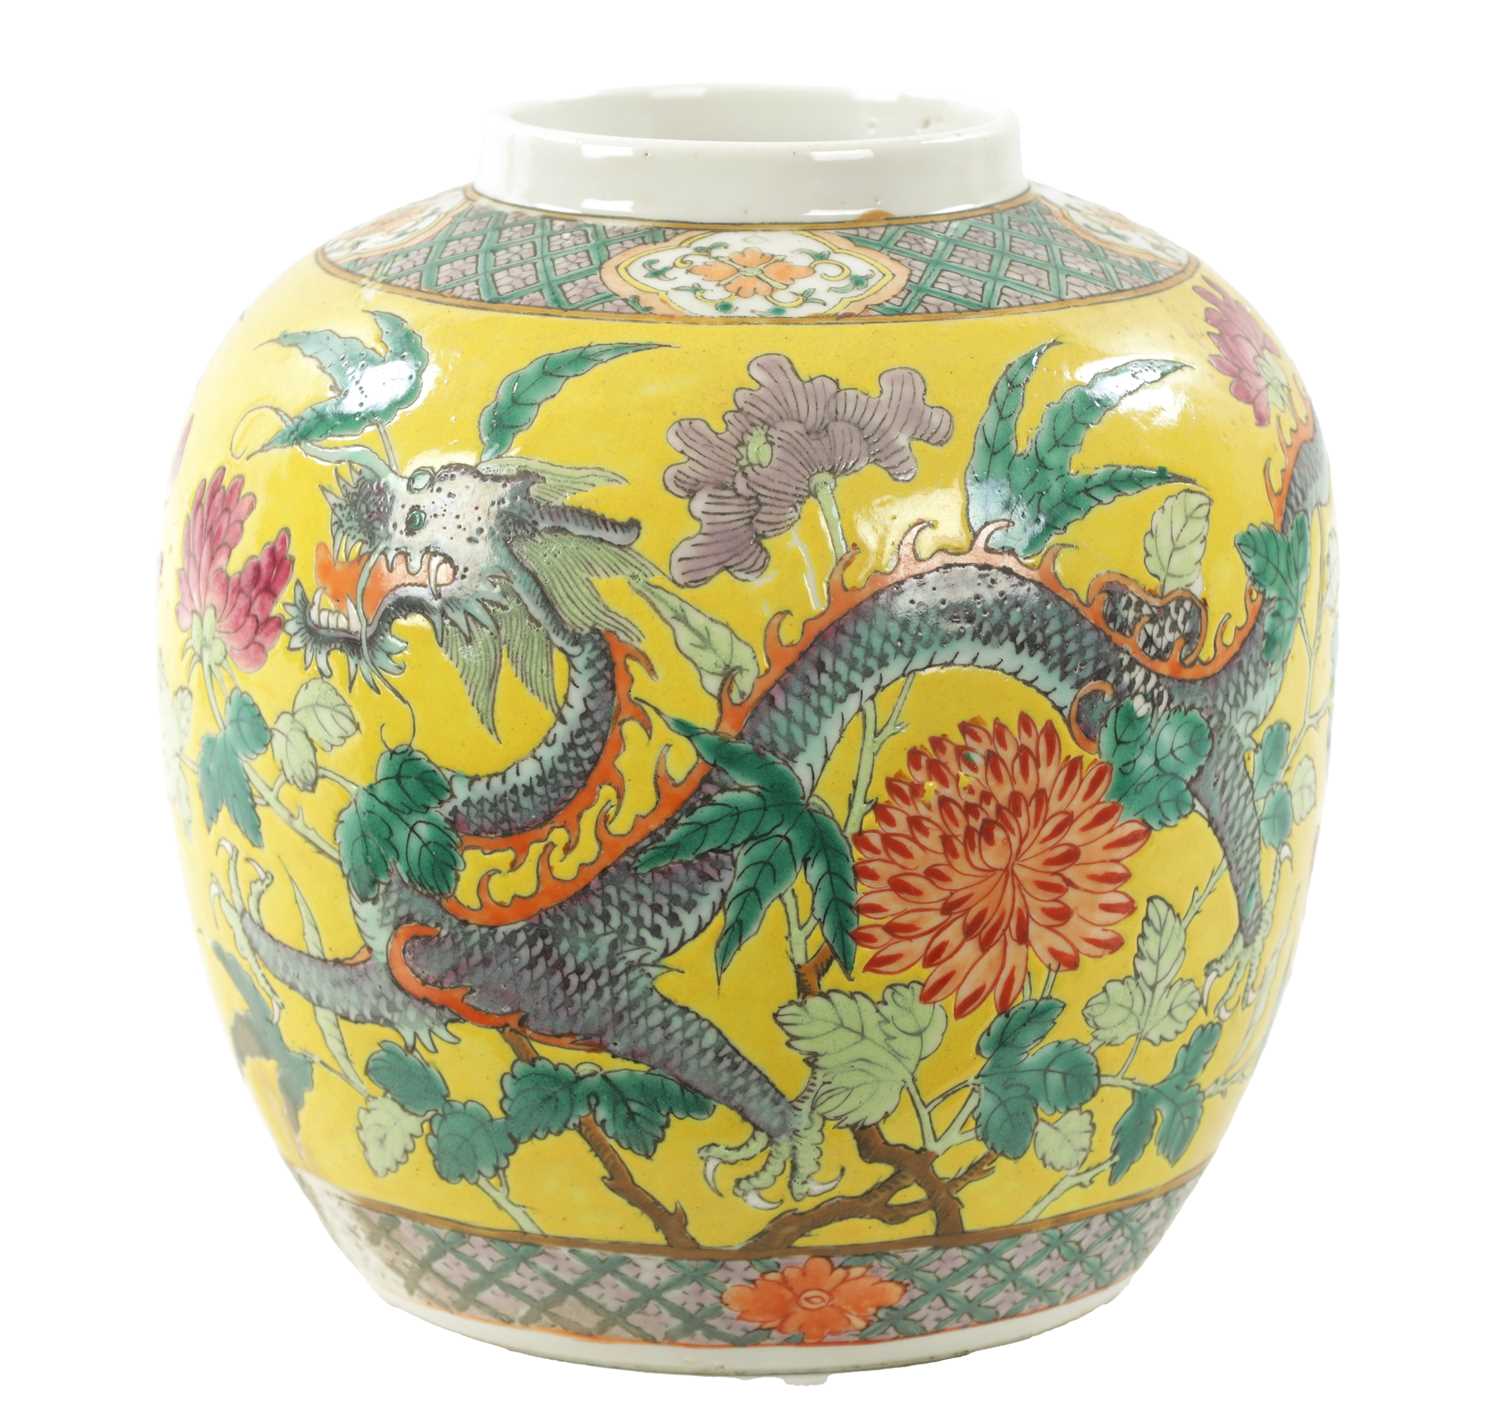 A 19TH CENTURY CHINESE EXPORT GINGER JAR